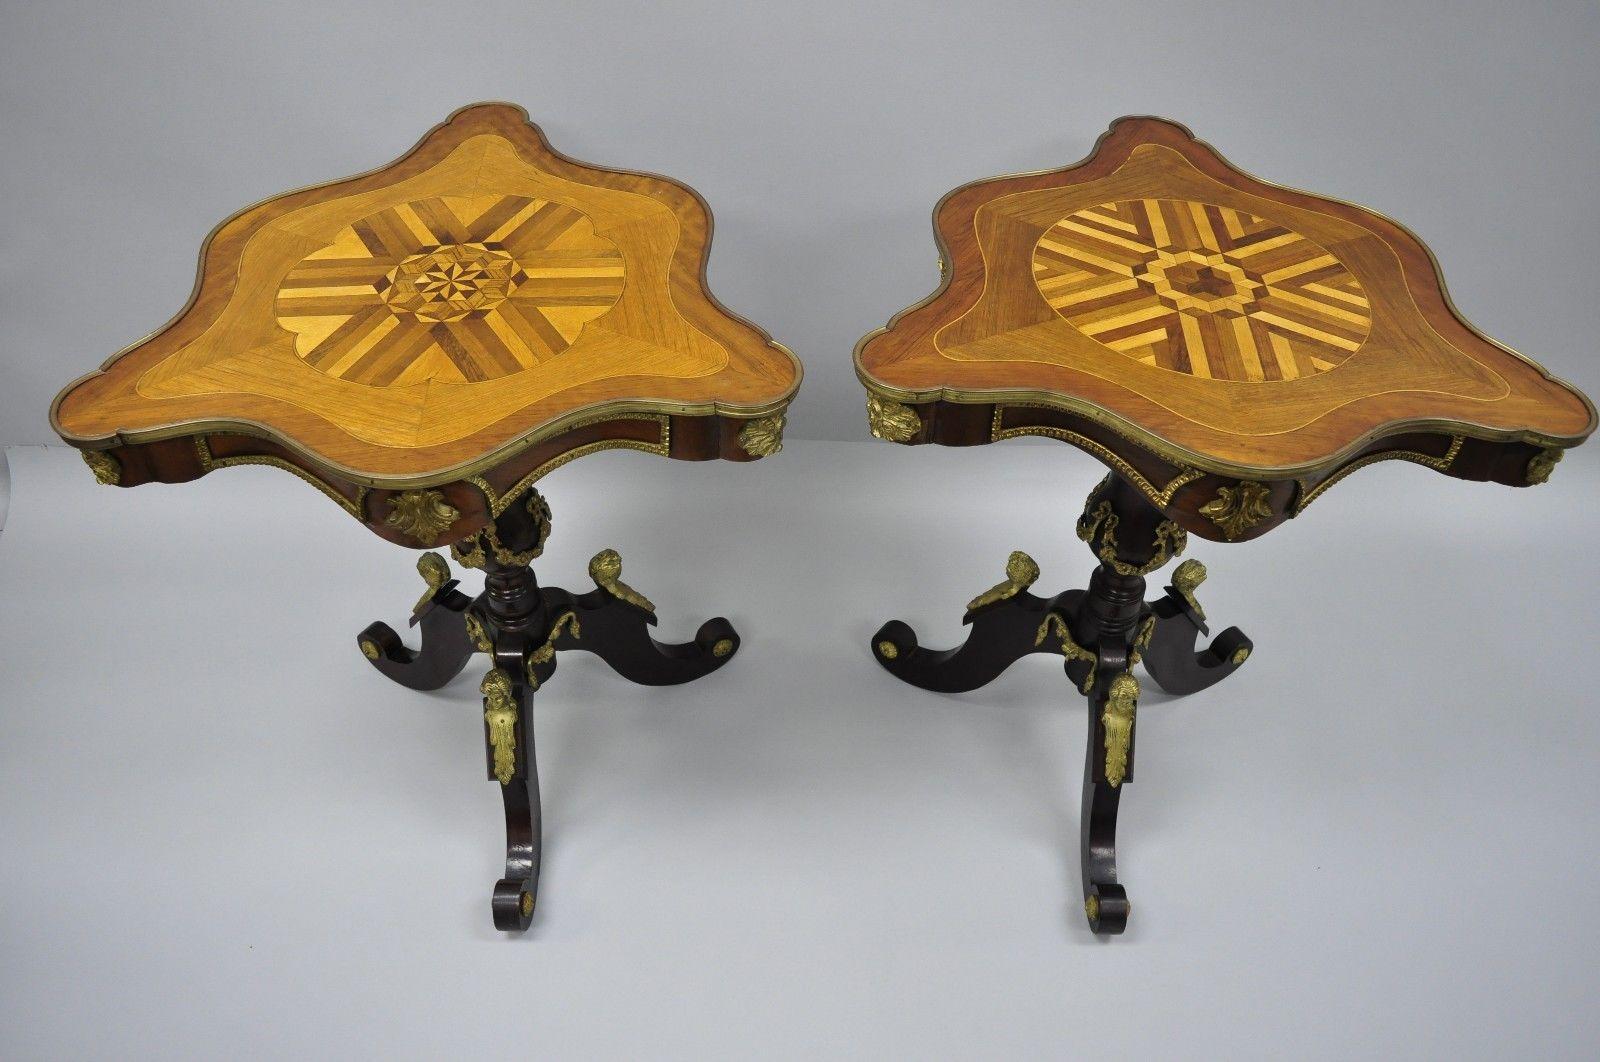 A Pair Louis XV French Style Reproduction Marquetry Inlaid Side Tables with Bronze Figures. Item features bronze ormolu with female faces, marquetry inlaid triangular tops, pedestal base, cabriole legs, great style and form. Circa Late 20th Century.